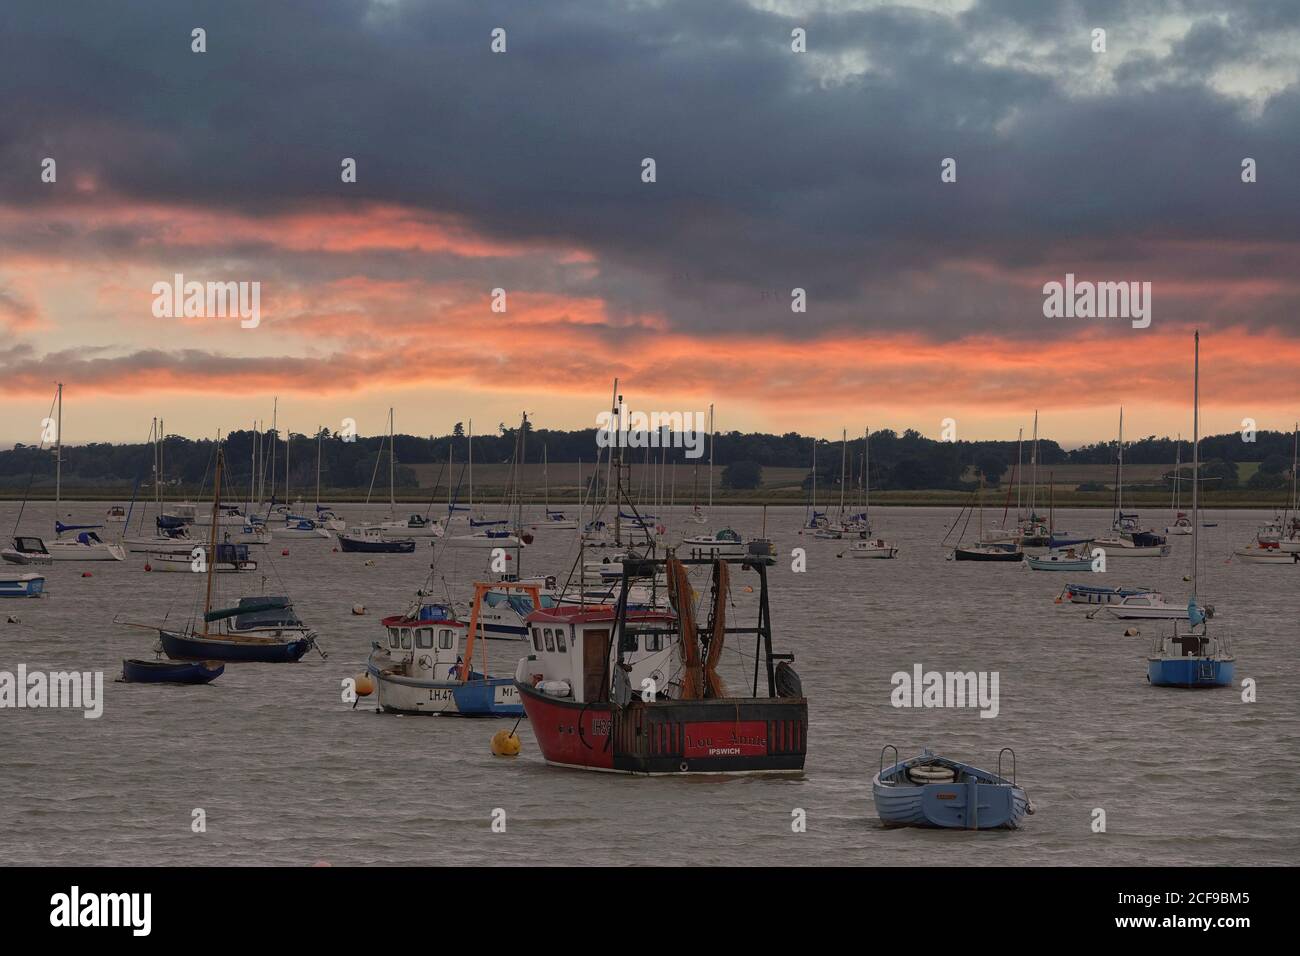 Felixstowe Ferry Suffolk's quirky "olde World" fishing village viewed as the sun rises Stock Photo